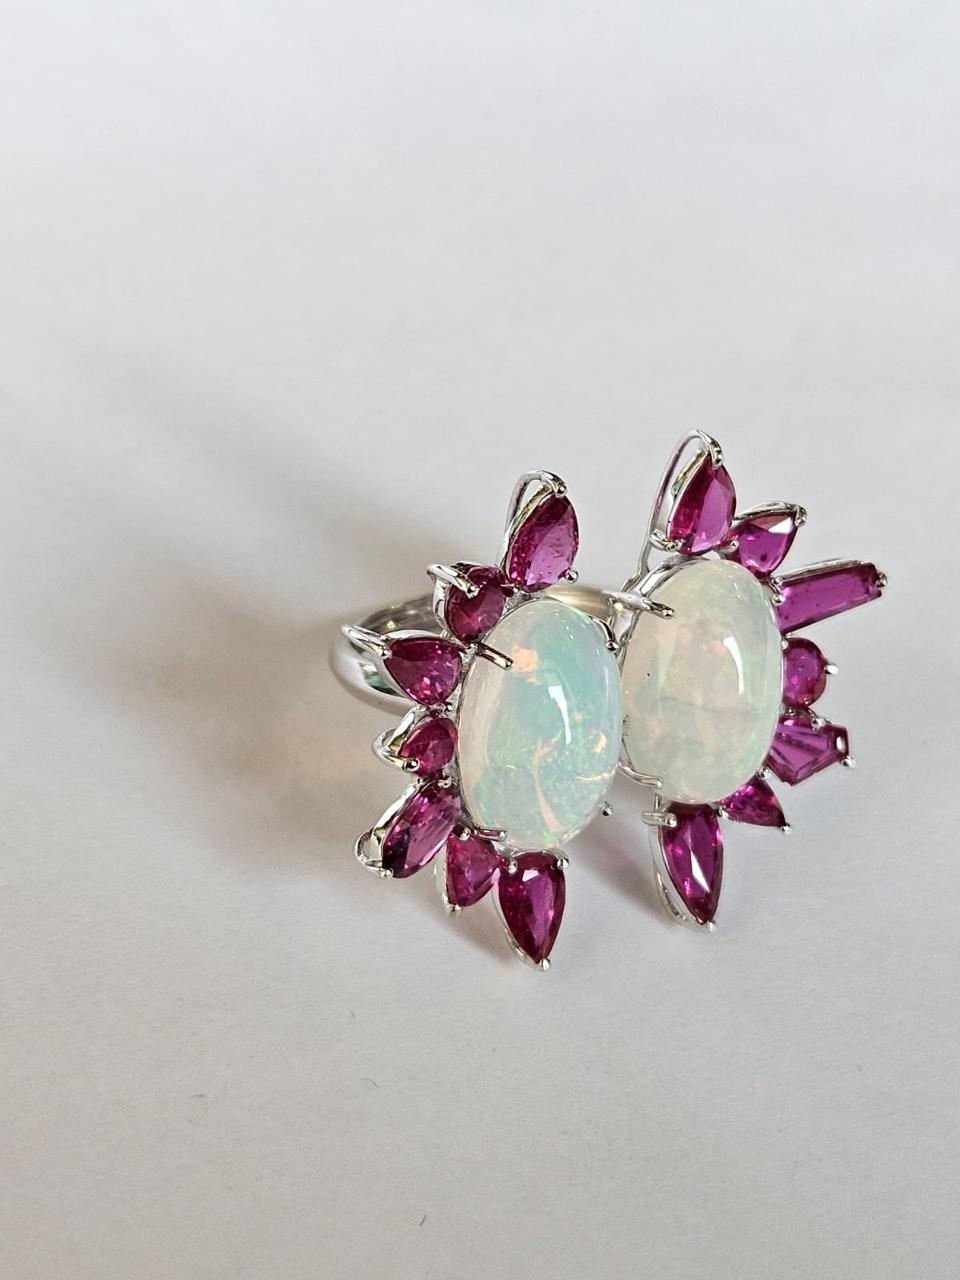 A very gorgeous and special, Opal & Ruby Cocktail Ring set in 18K White Gold & Diamonds. The weight of the Opals is 6.30 carats. The Opals are of Ethiopian origin. The Ruby weight is 5.45 carats. The Rubies are completely natural, without any